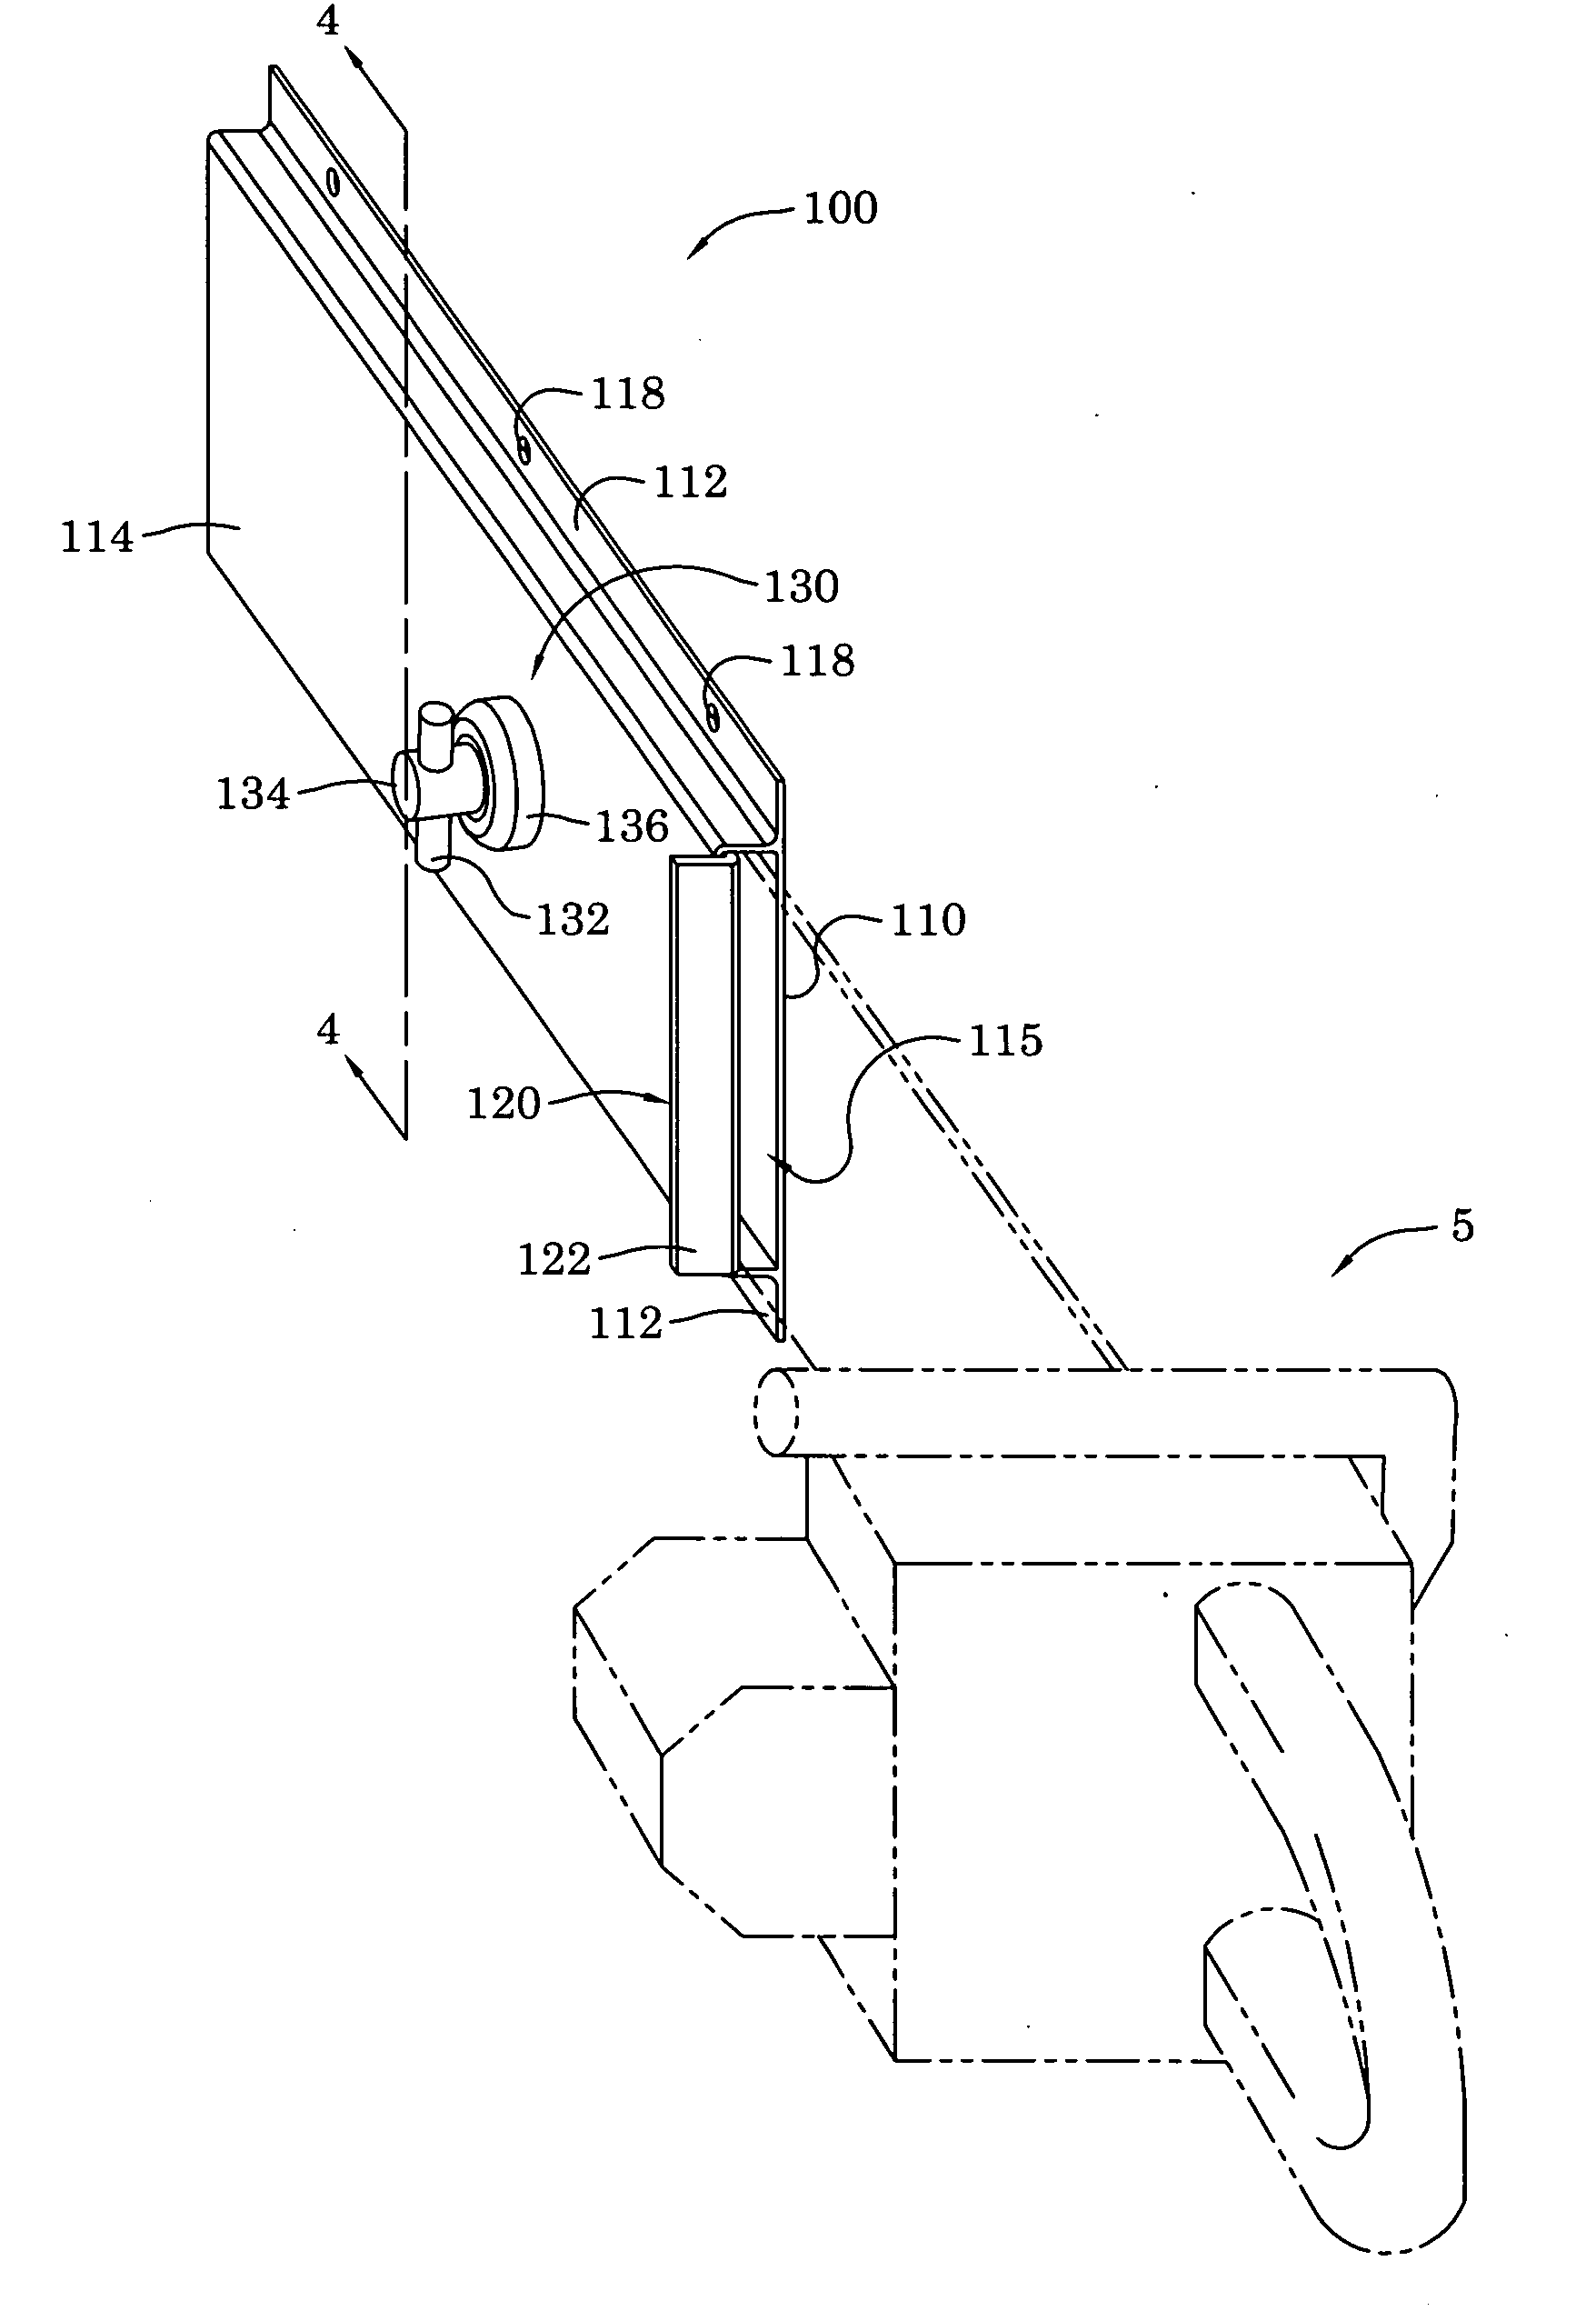 Chainsaw holding apparatus